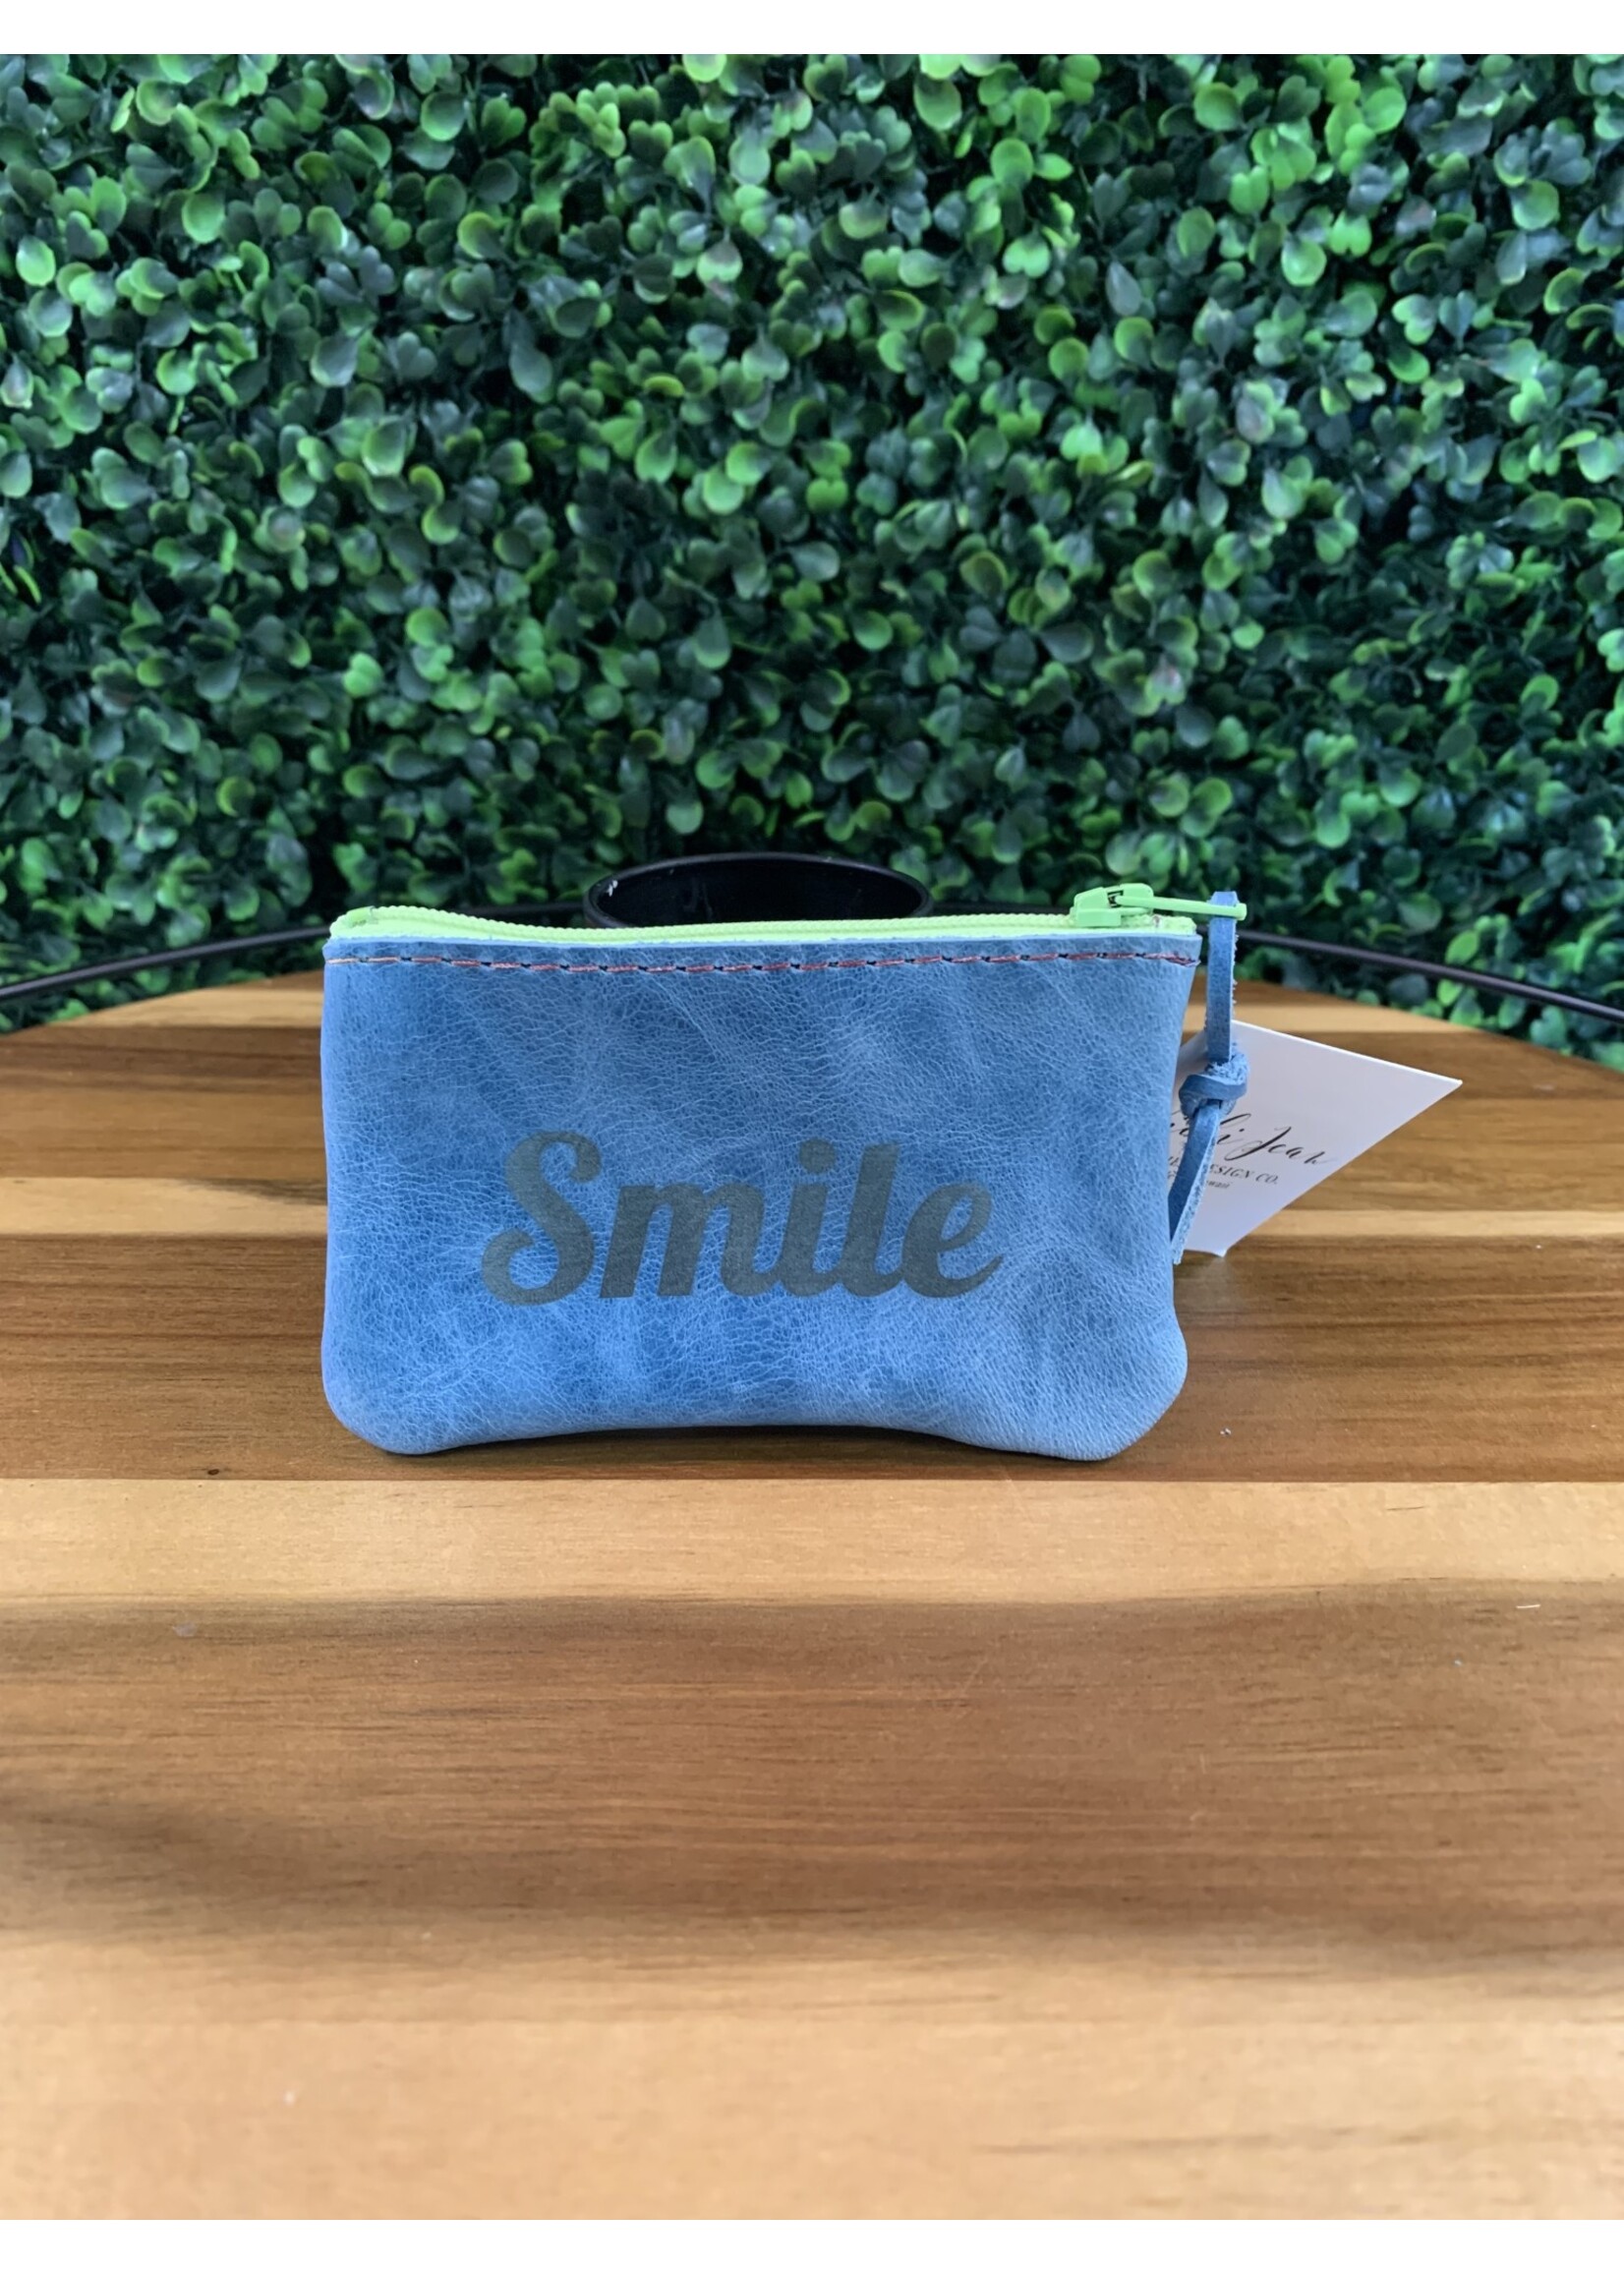 Vicki Jean Leather Design Co Beachy Pouch - Small Smile Leather